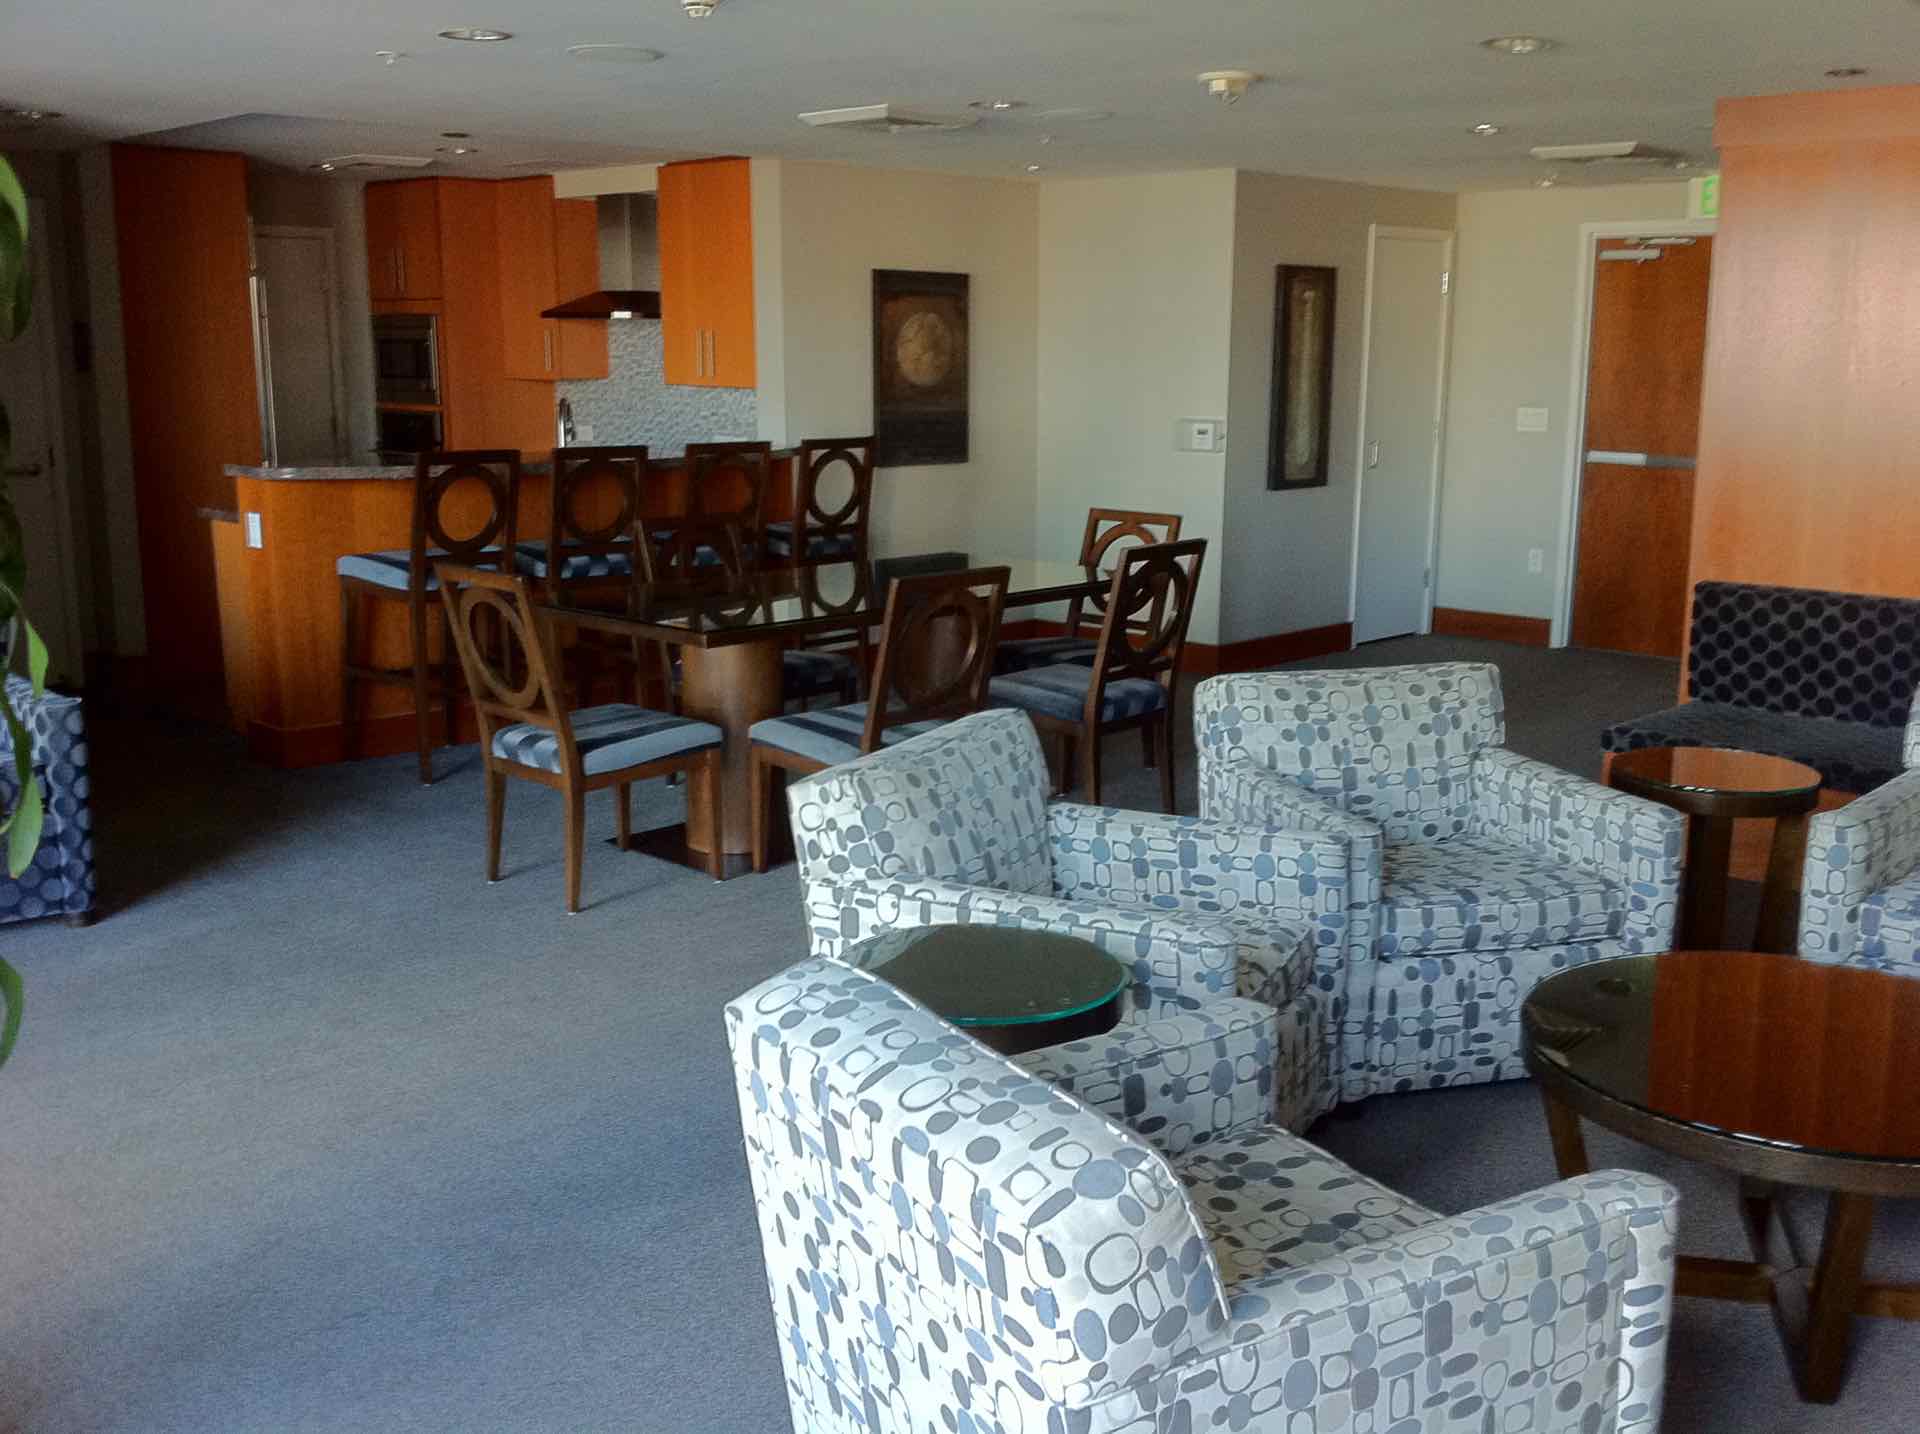 Community Lounge at The Legend condo building